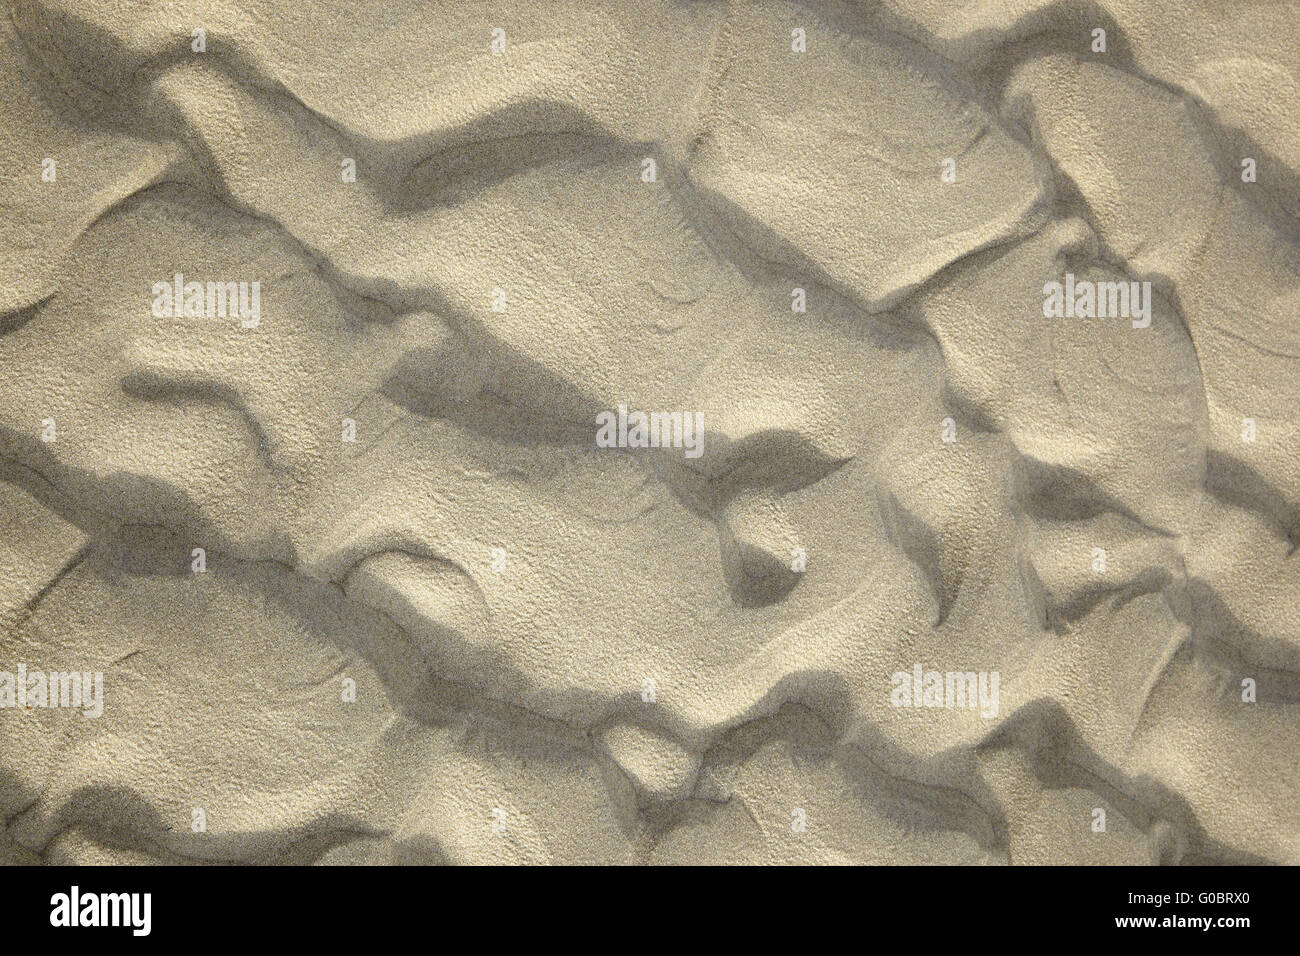 sand texture with lines Stock Photo